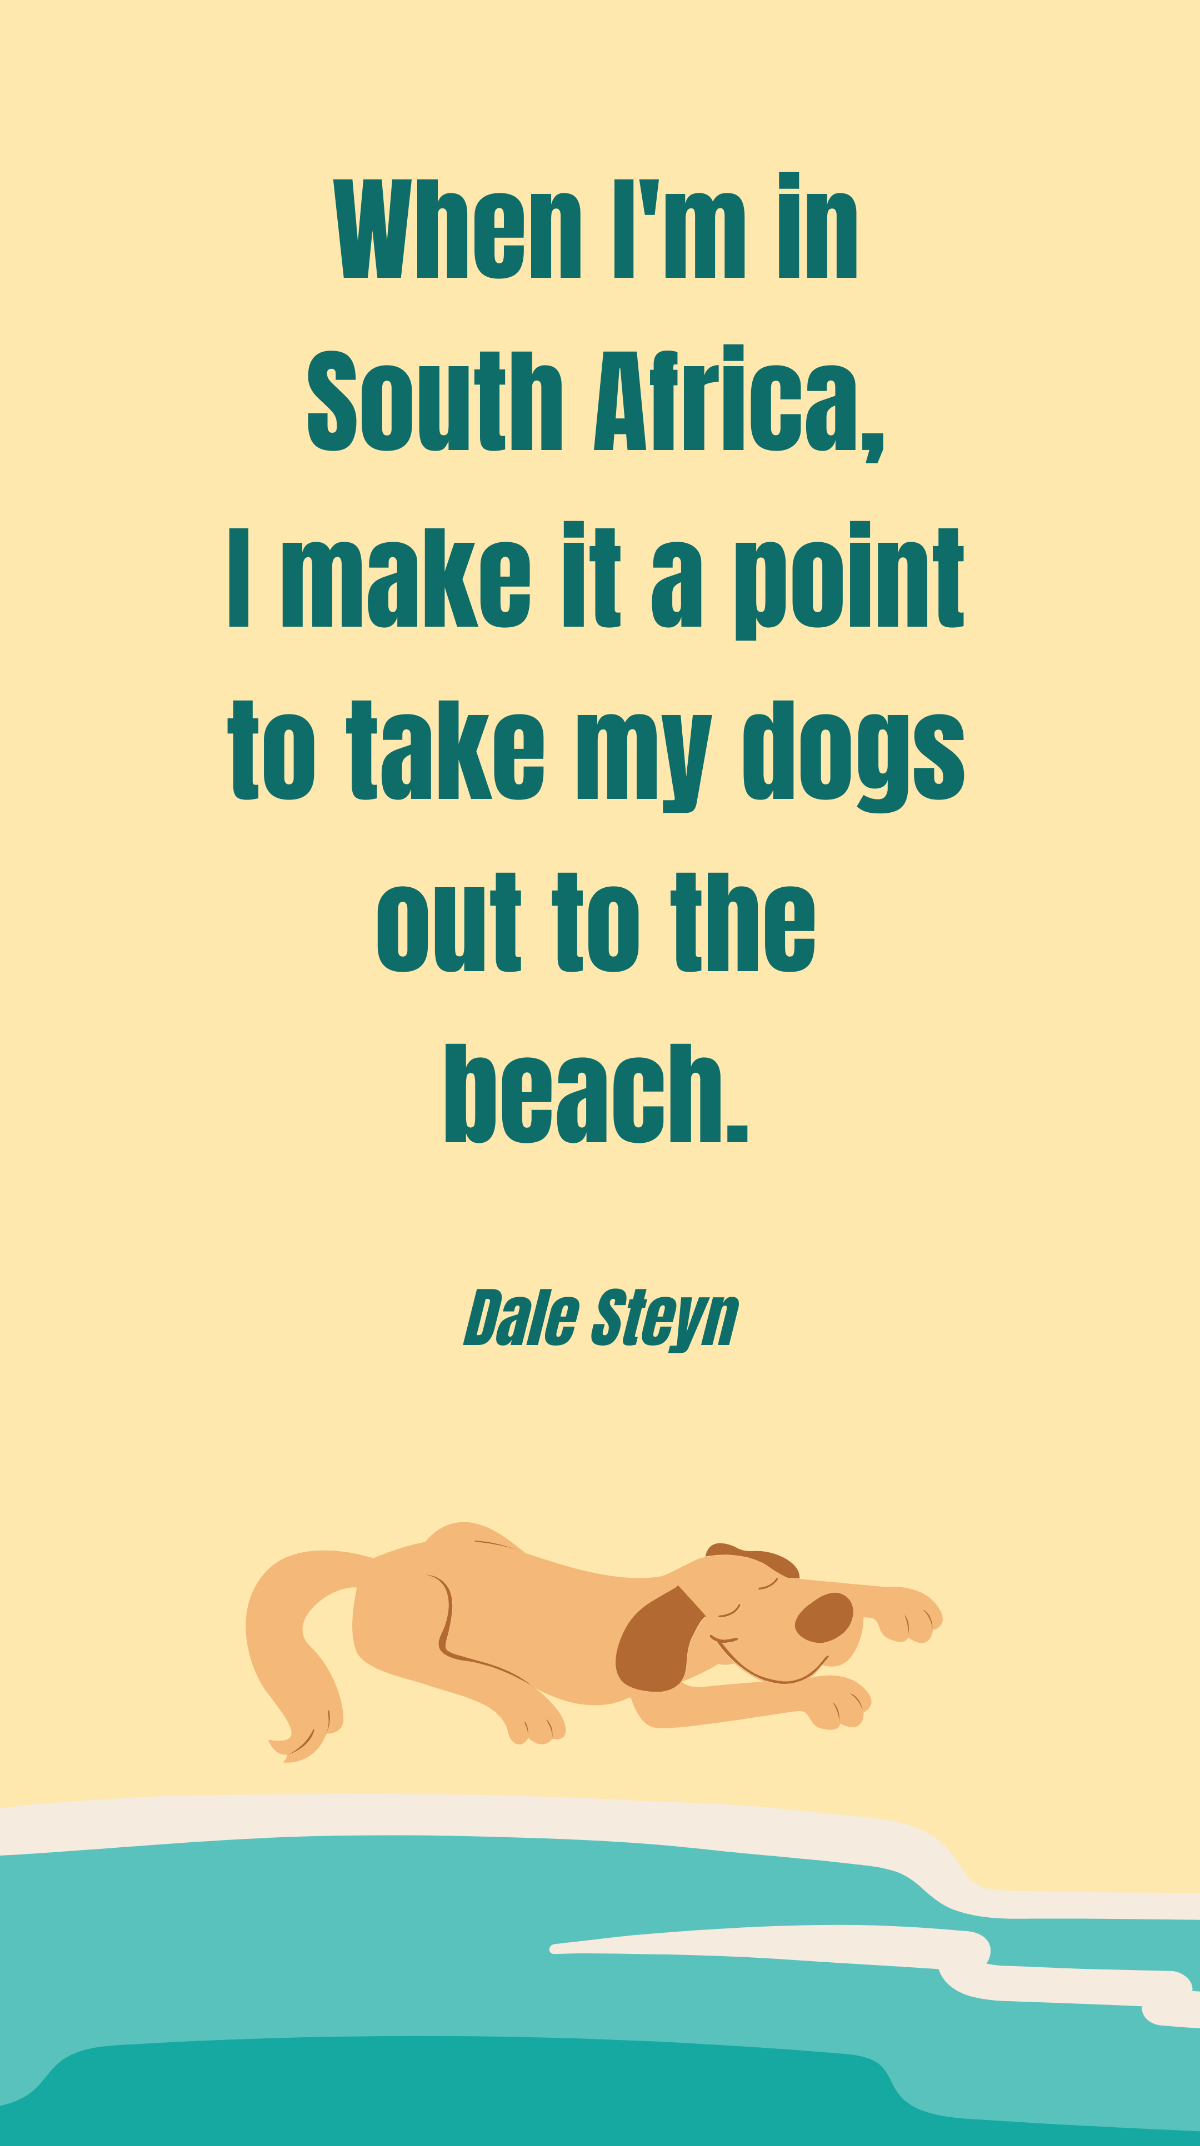 Free Dale Steyn - When I'm in South Africa, I make it a point to take my dogs out to the beach. Template